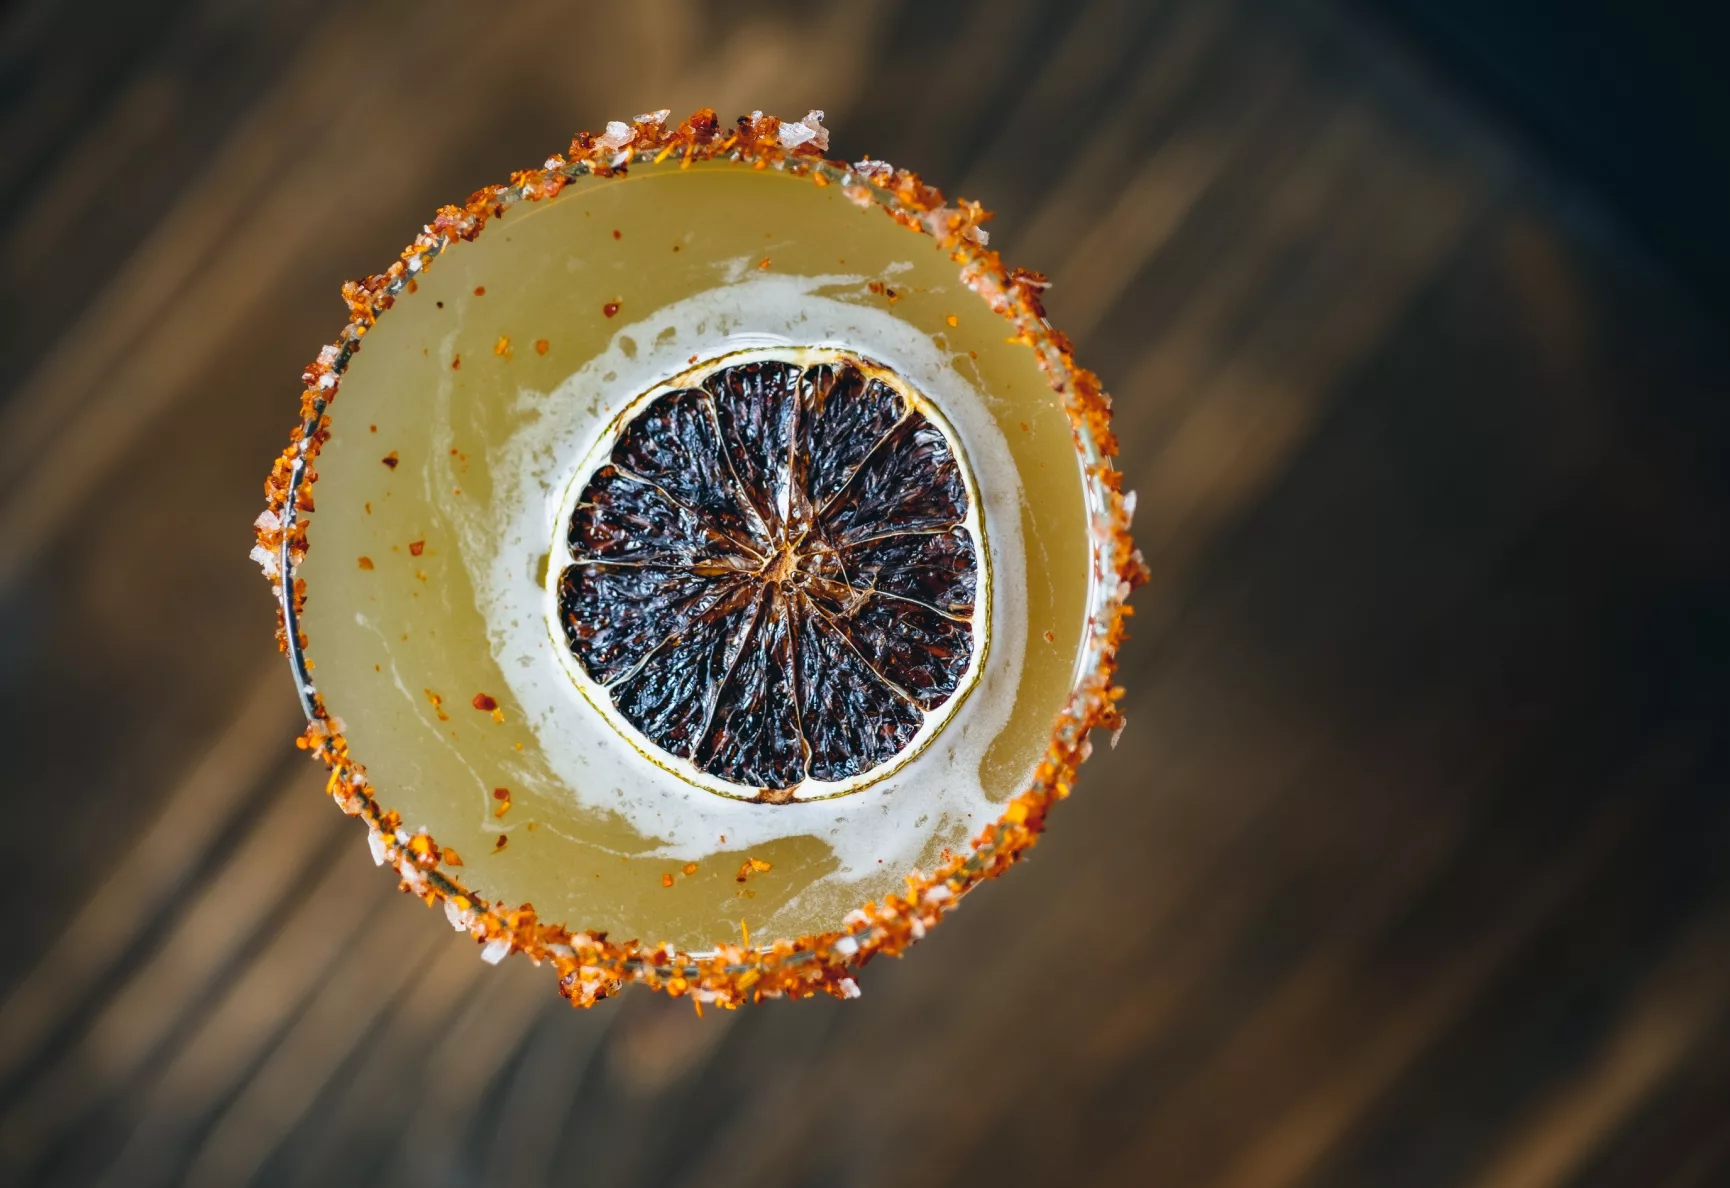 Overhead view of a cocktail garnished with a slice of dried blood orange